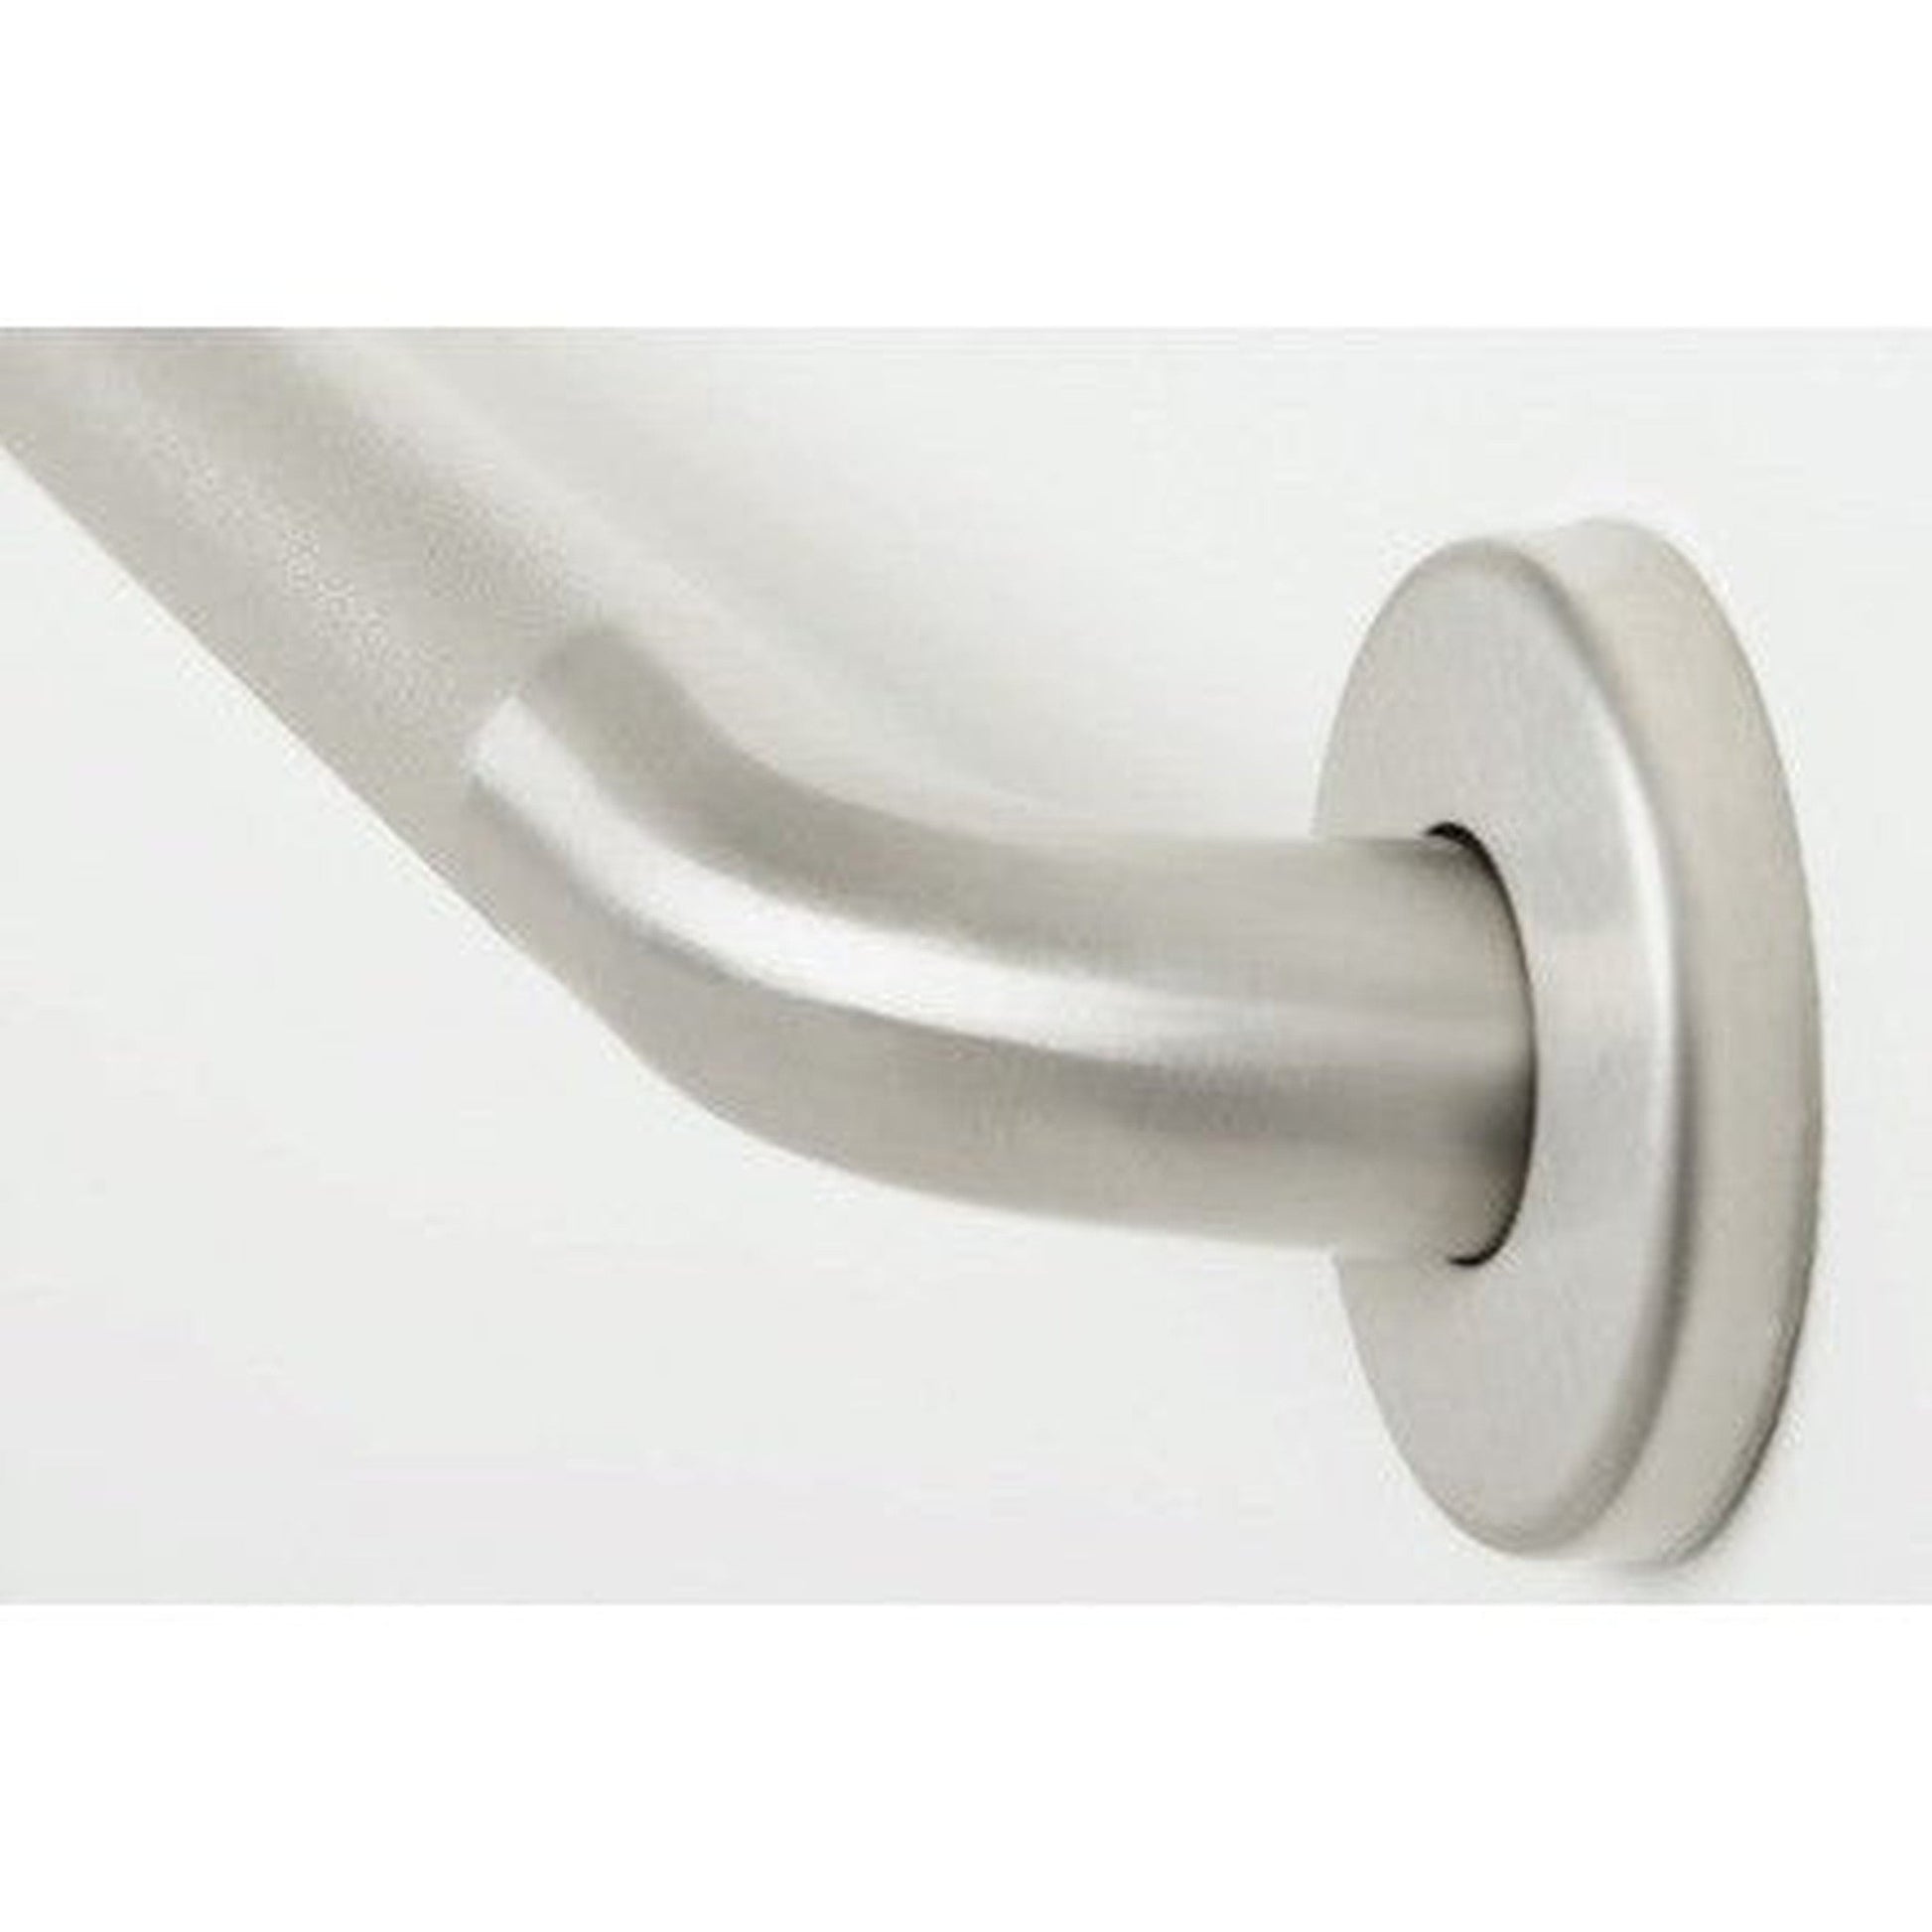 Seachrome Signature GY Series 48" Peened With Satin Stainless Steel Ends 1.25" Tube Diameter Straight Grab Bar